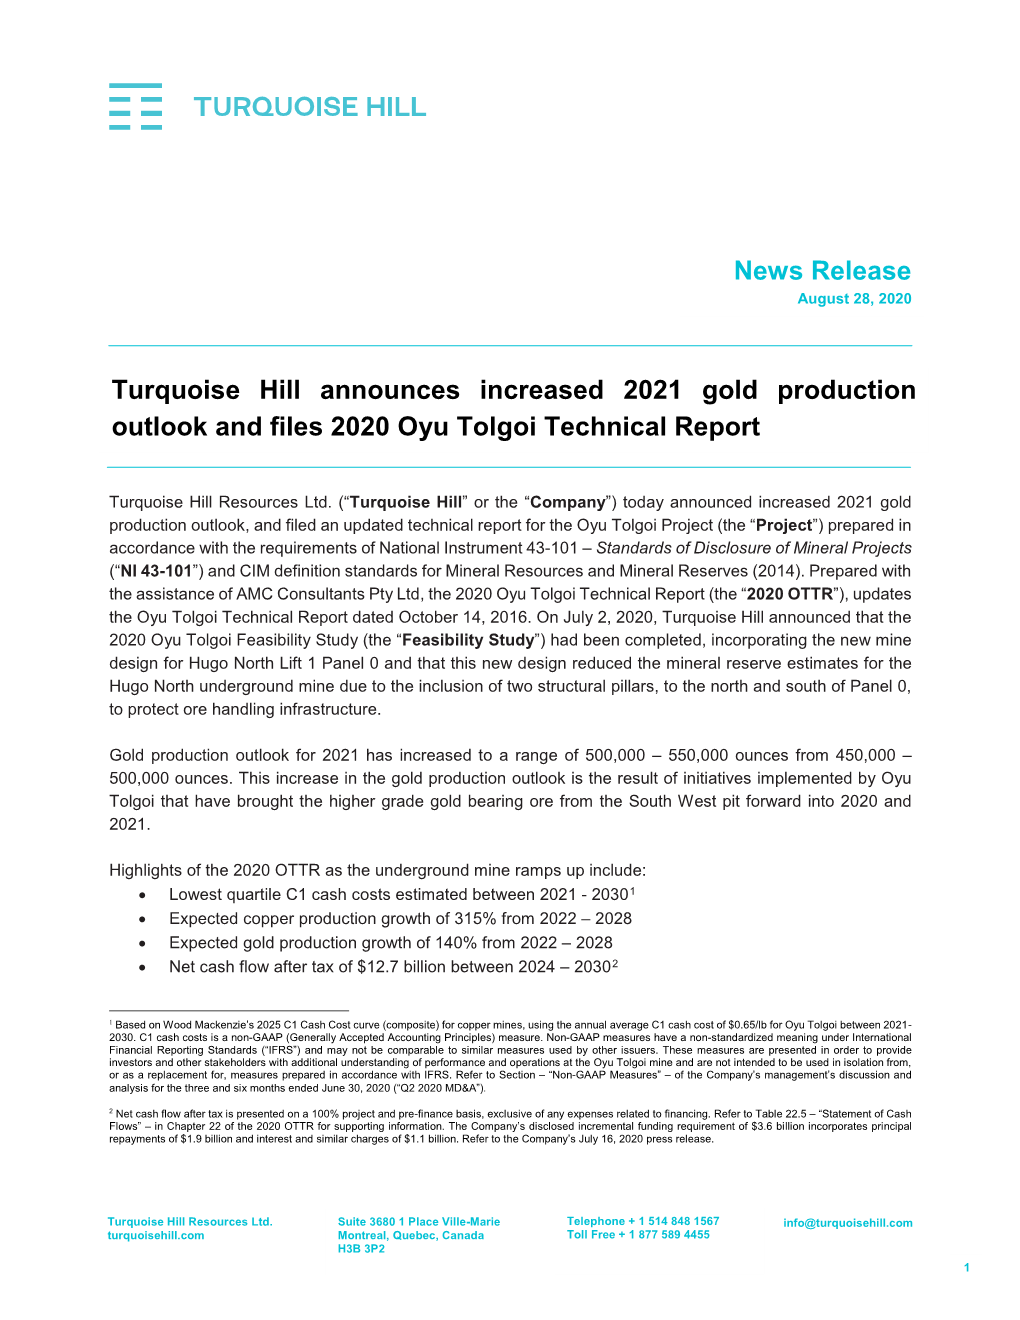 News Release Turquoise Hill Announces Increased 2021 Gold Production Outlook and Files 2020 Oyu Tolgoi Technical Report